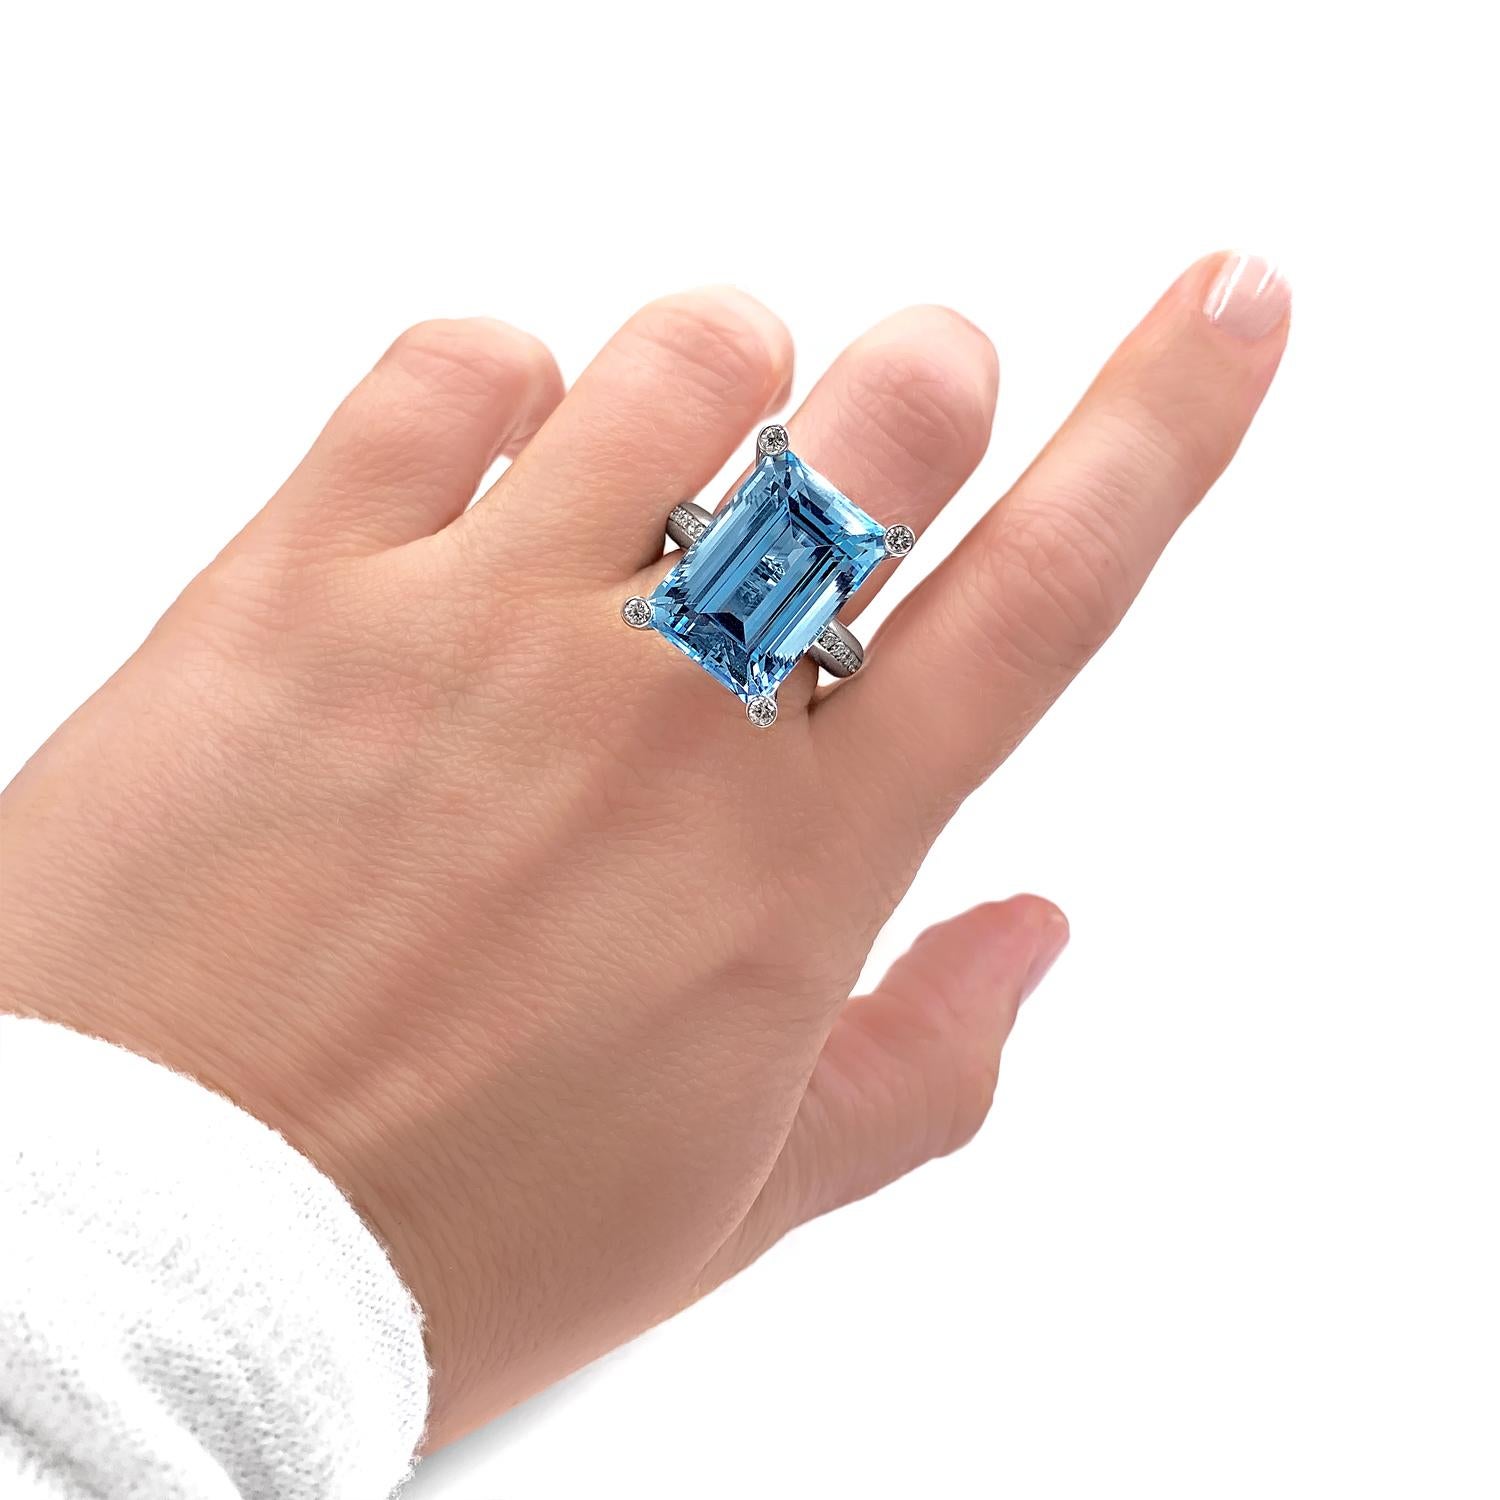 One-of-a-Kind Princess Ring handcrafted in Germany by master metalsmith and gem-cutter Erich Zimmermann in high-polished platinum showcasing a top quality, exceptional 20.57 carat emerald-cut aquamarine (19mm x 13.3mm) invisibly-set in four